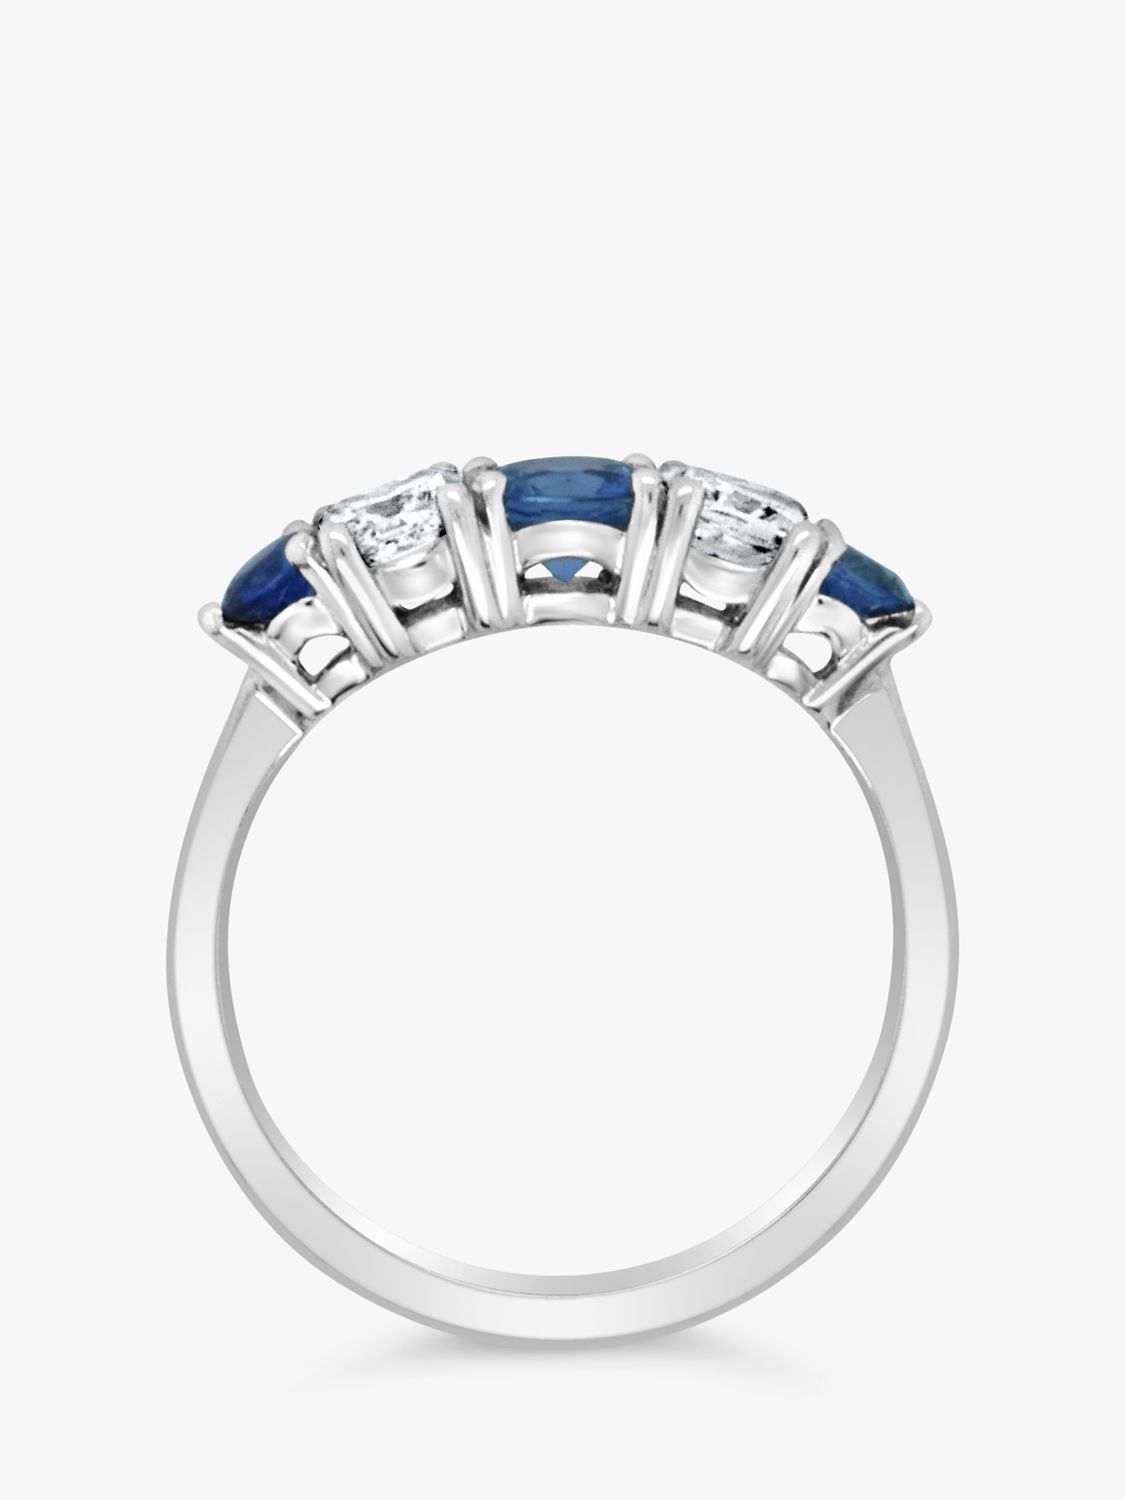 Buy Milton & Humble Jewellery Second Hand 18ct White Gold Sapphire & Diamond Ring, Dated London 2006 Online at johnlewis.com